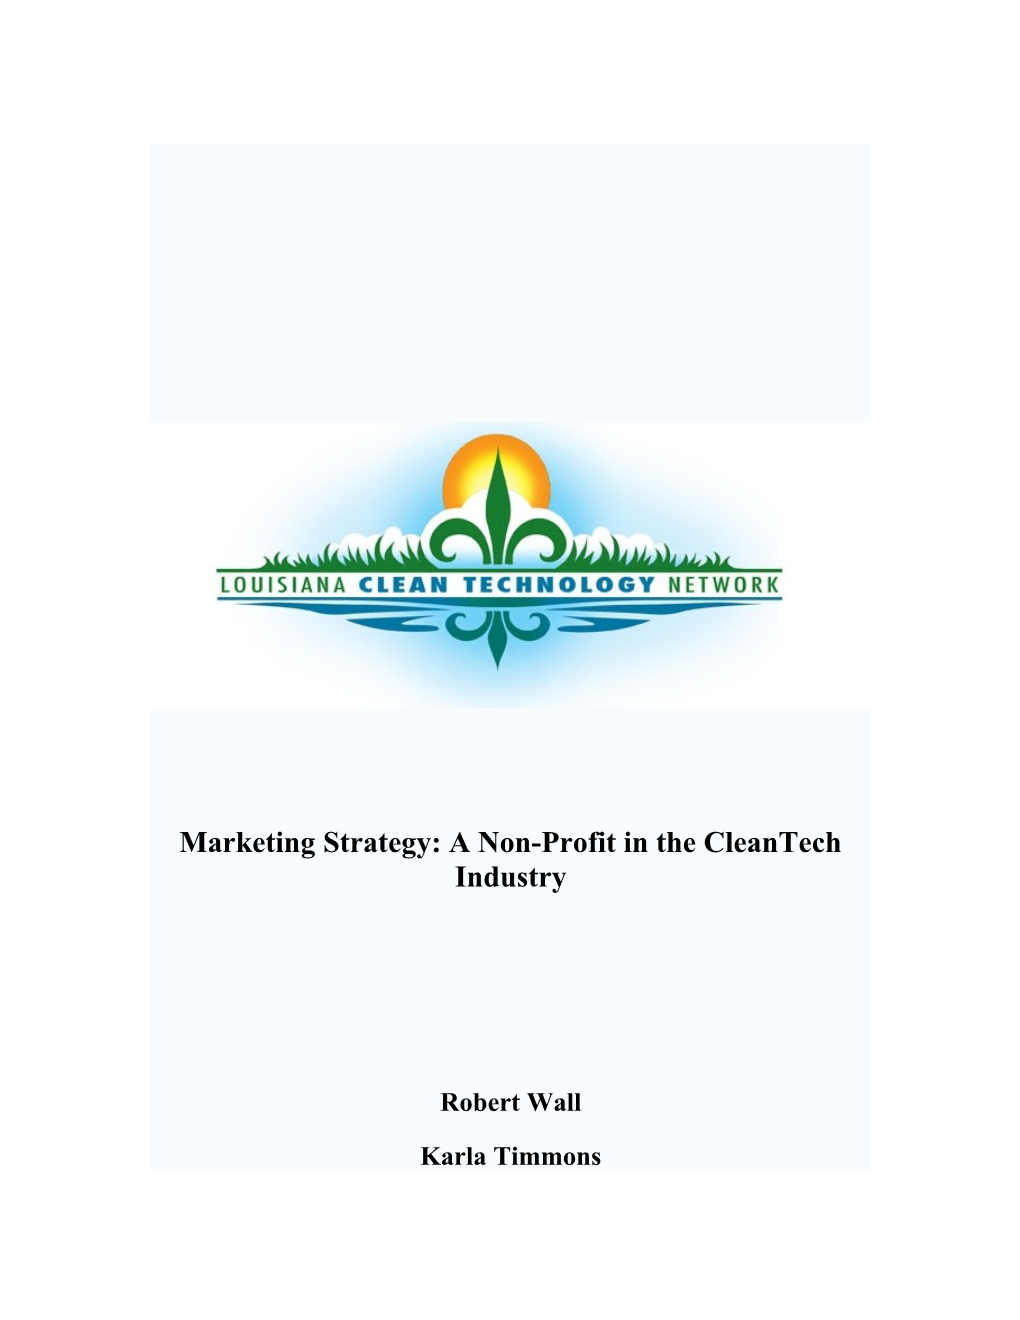 Marketing Strategy: a Non-Profit in the Cleantech Industry